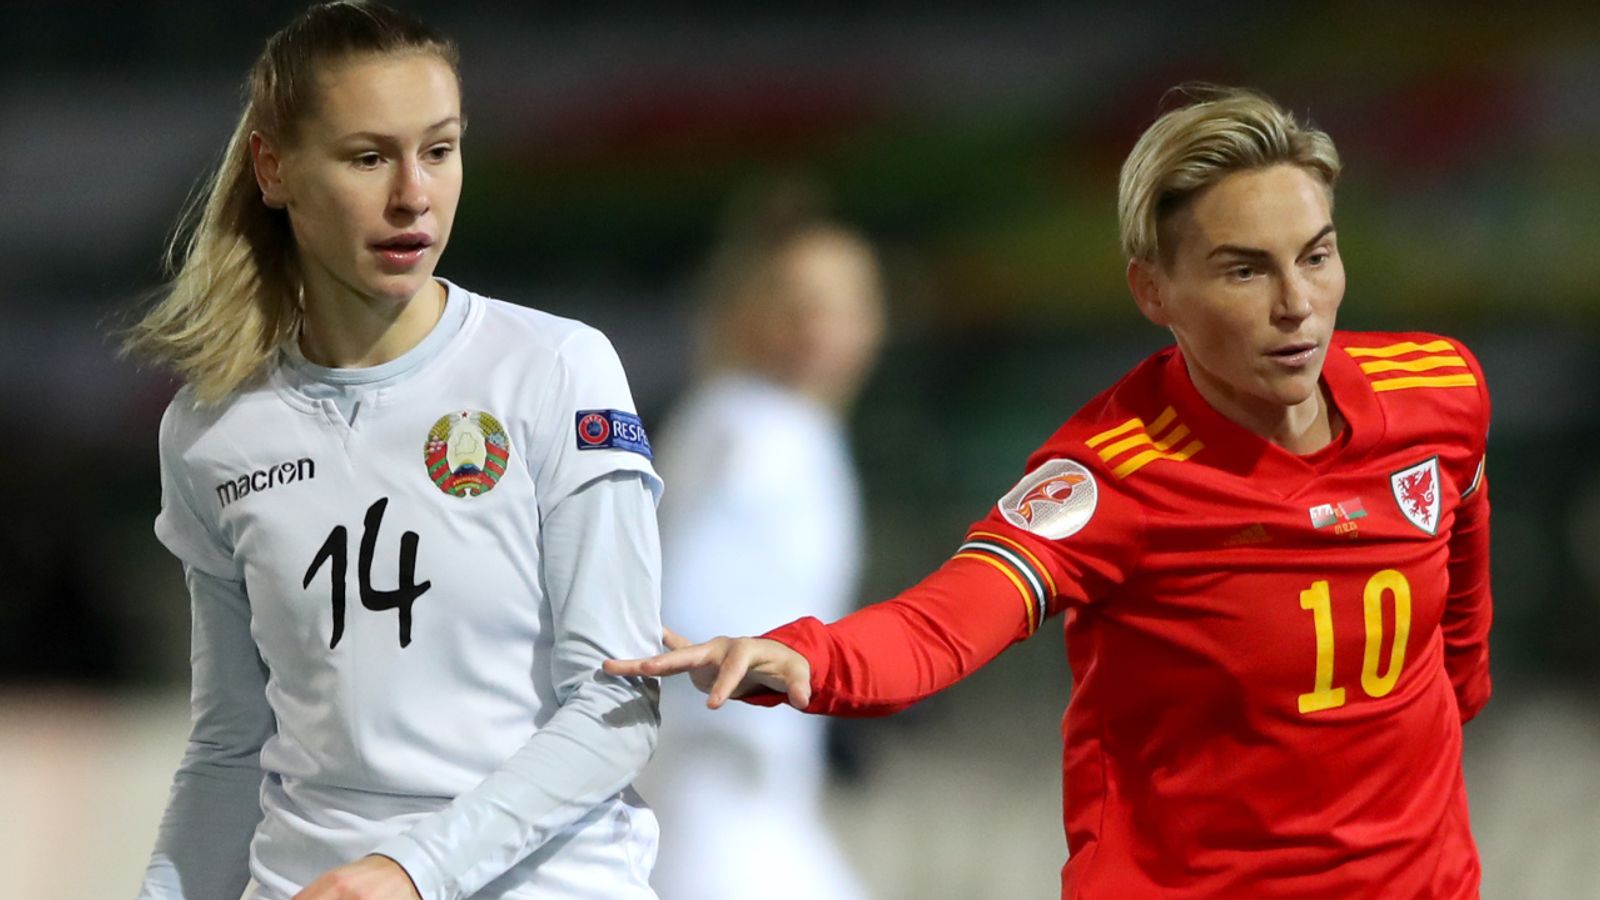 Wales to host Canada and Denmark in women's friendlies in April | Football News | Sky Sports